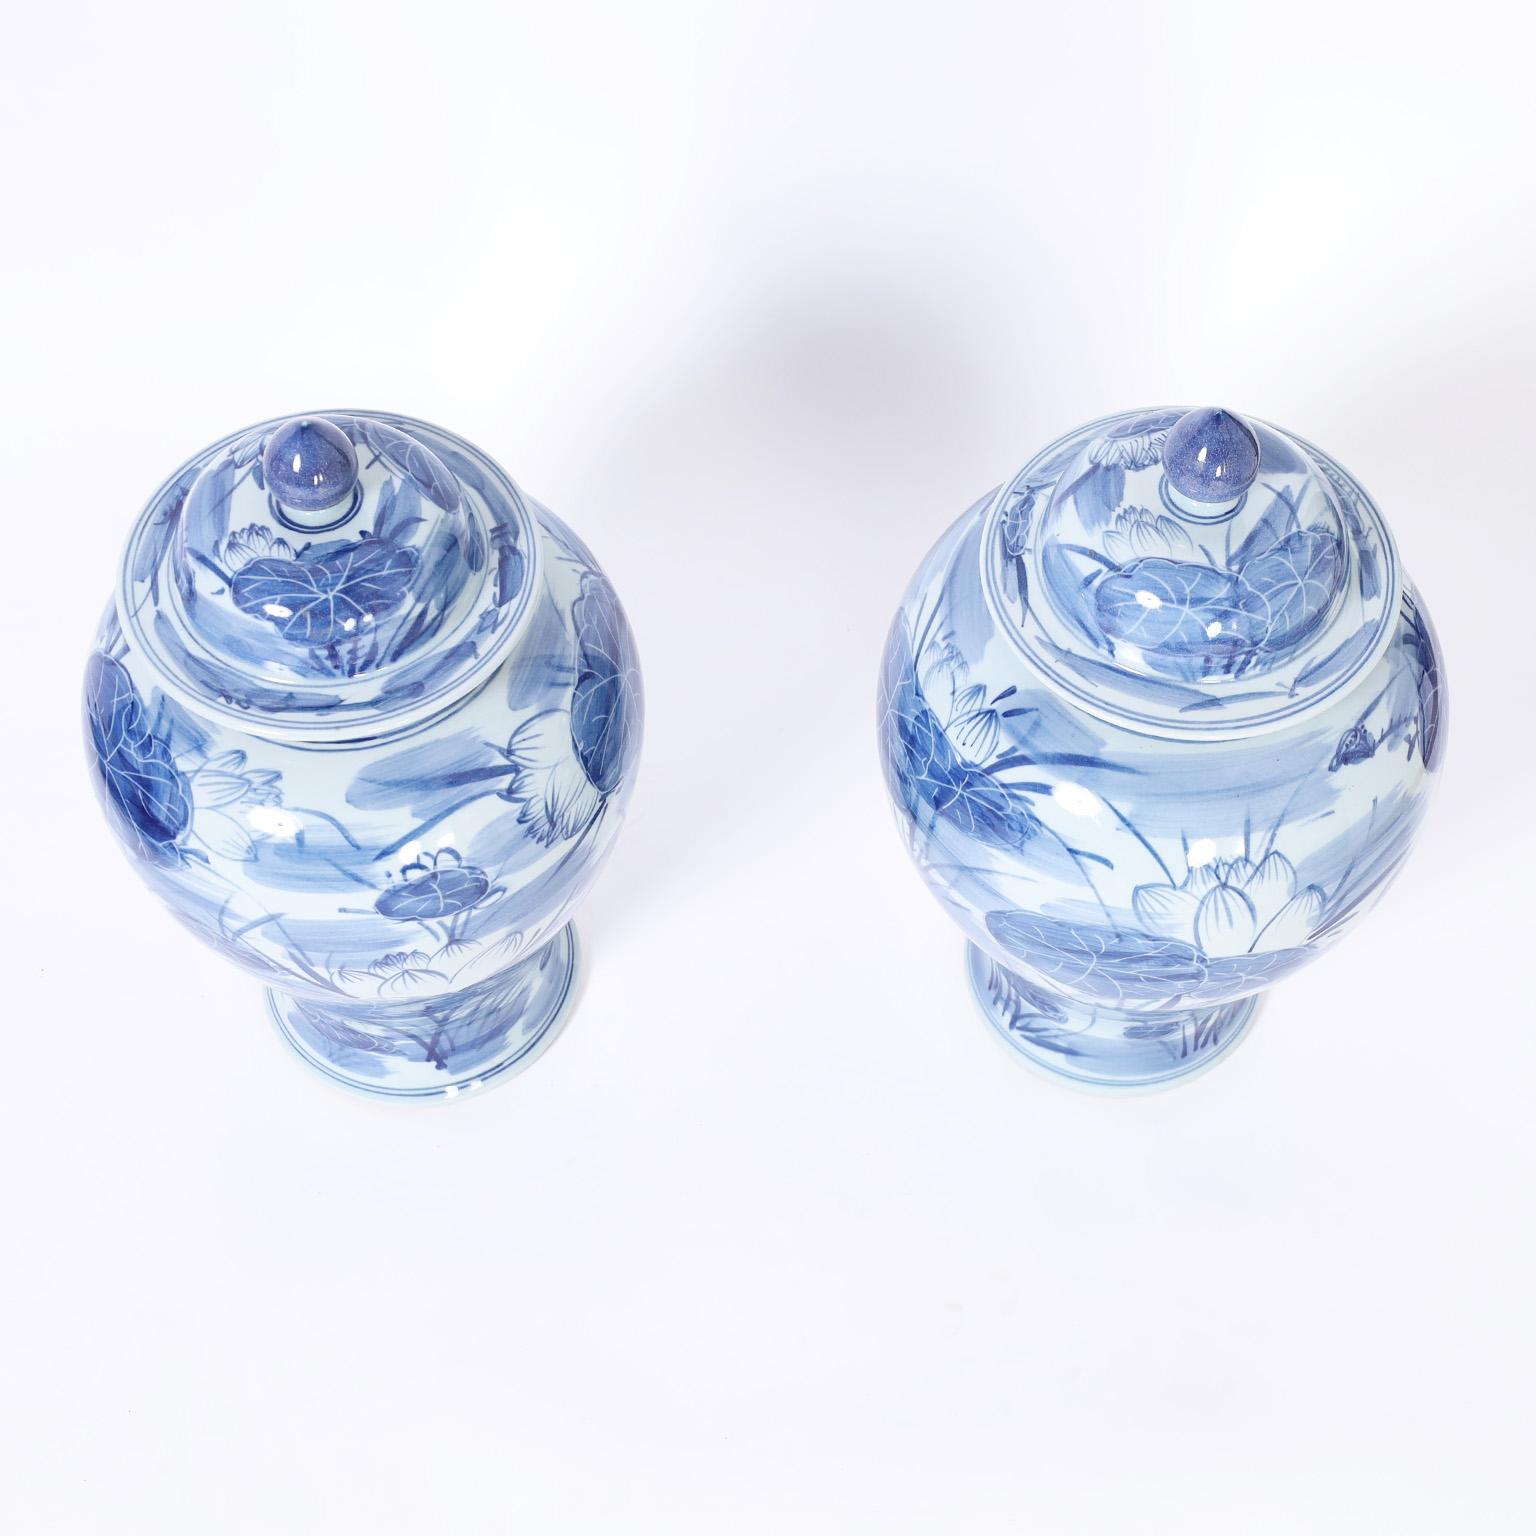 Chinese Export Pair of Blue and White Porcelain Lidded Urns with Lilies For Sale